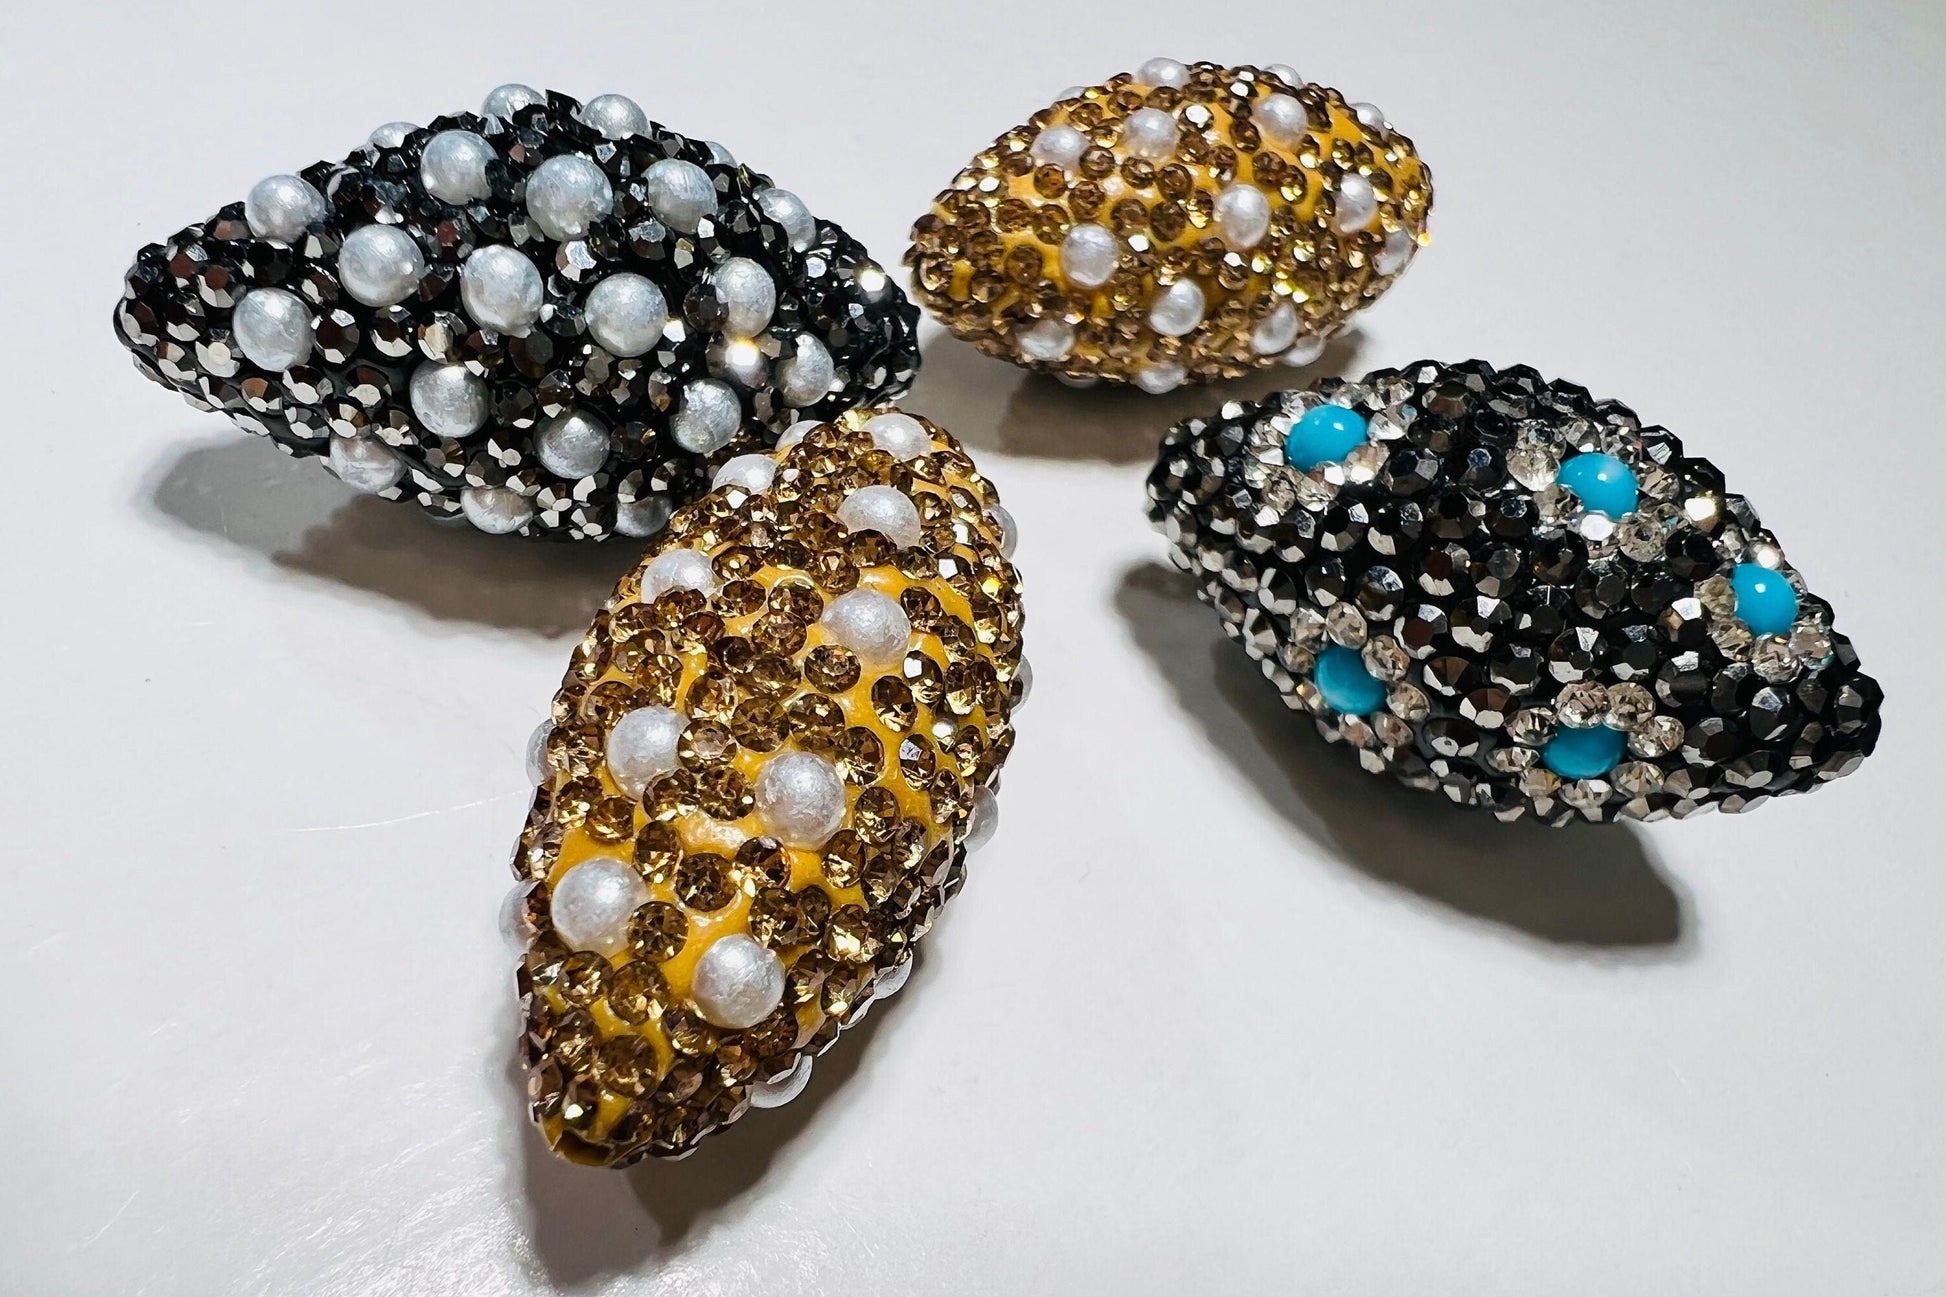 Pearl and Turquoise with Gold & Black Crystal Pave Rhinestone Handmade Fancy Focal Bead, 30-35mm Long, 1 pc, Jewelry Making Bling Bead